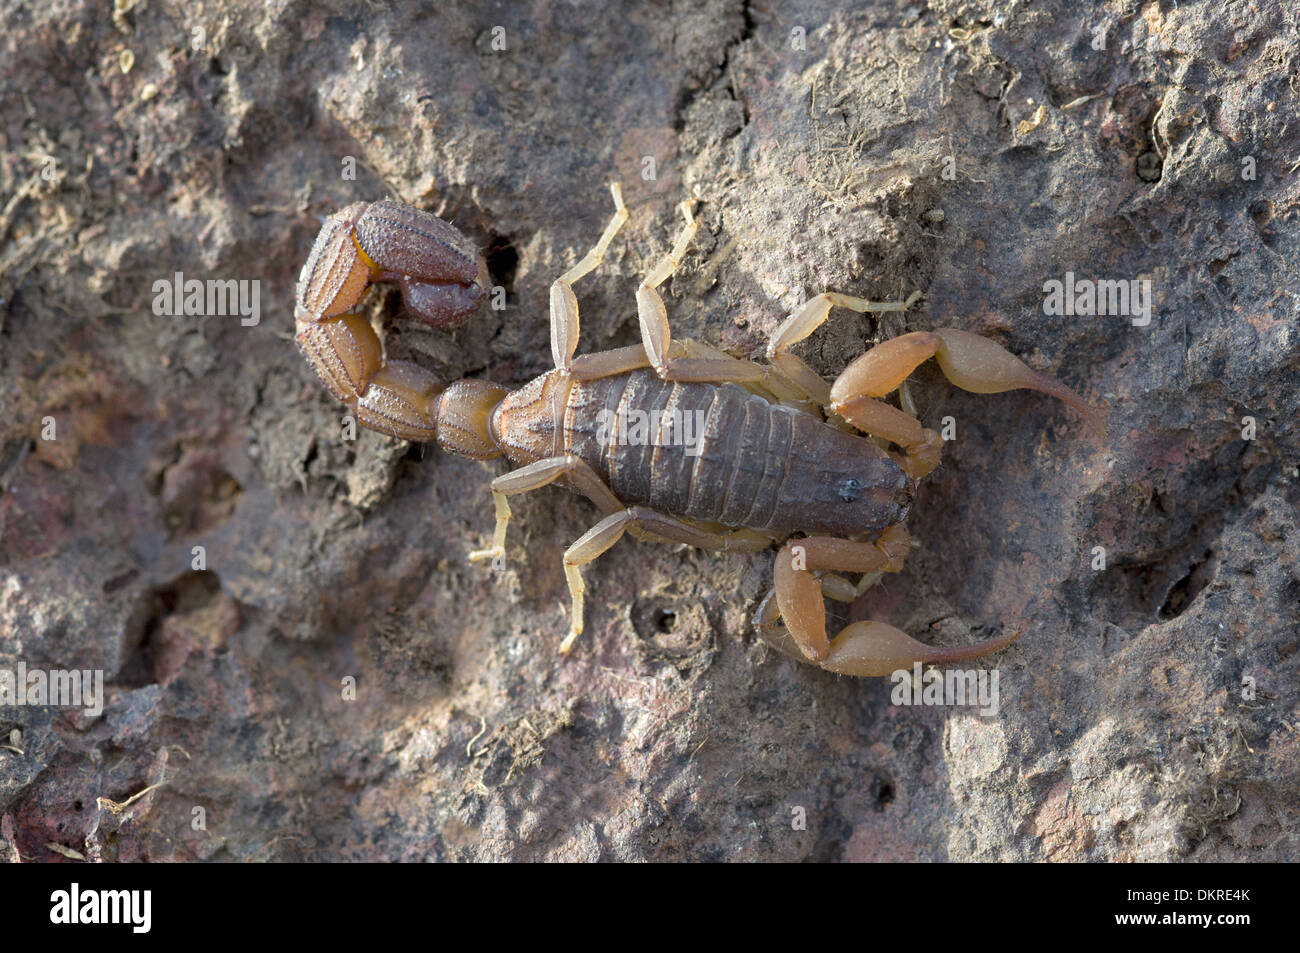 Hottentotta Tamulus, Family BUTHIDAE Indian Red scorpion, one of most widely distributed species of scorpion in India. Stock Photo